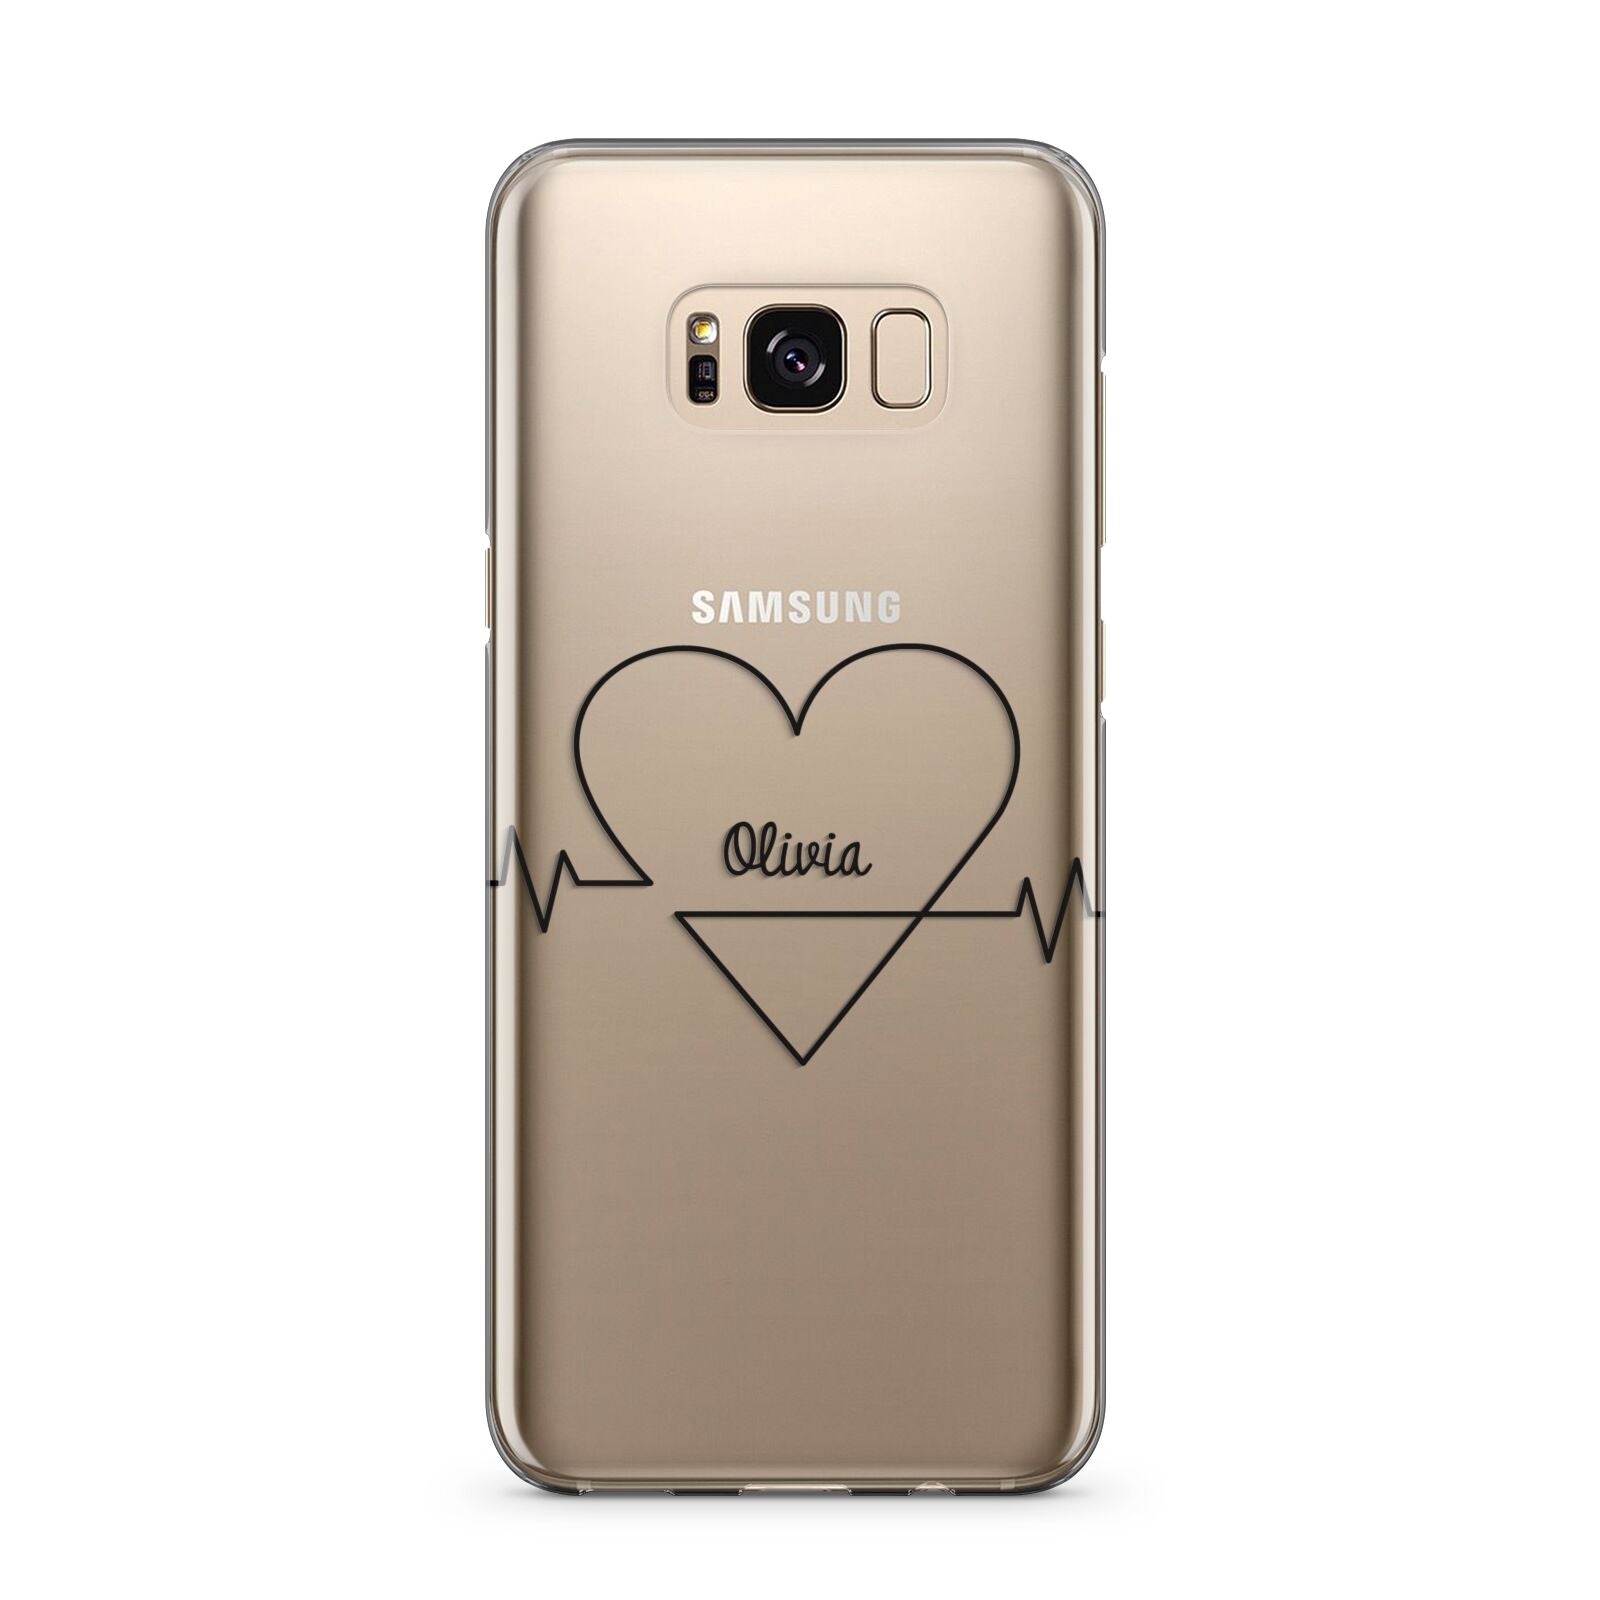 ECG Effect Heart Beats with Name Samsung Galaxy S8 Plus Case